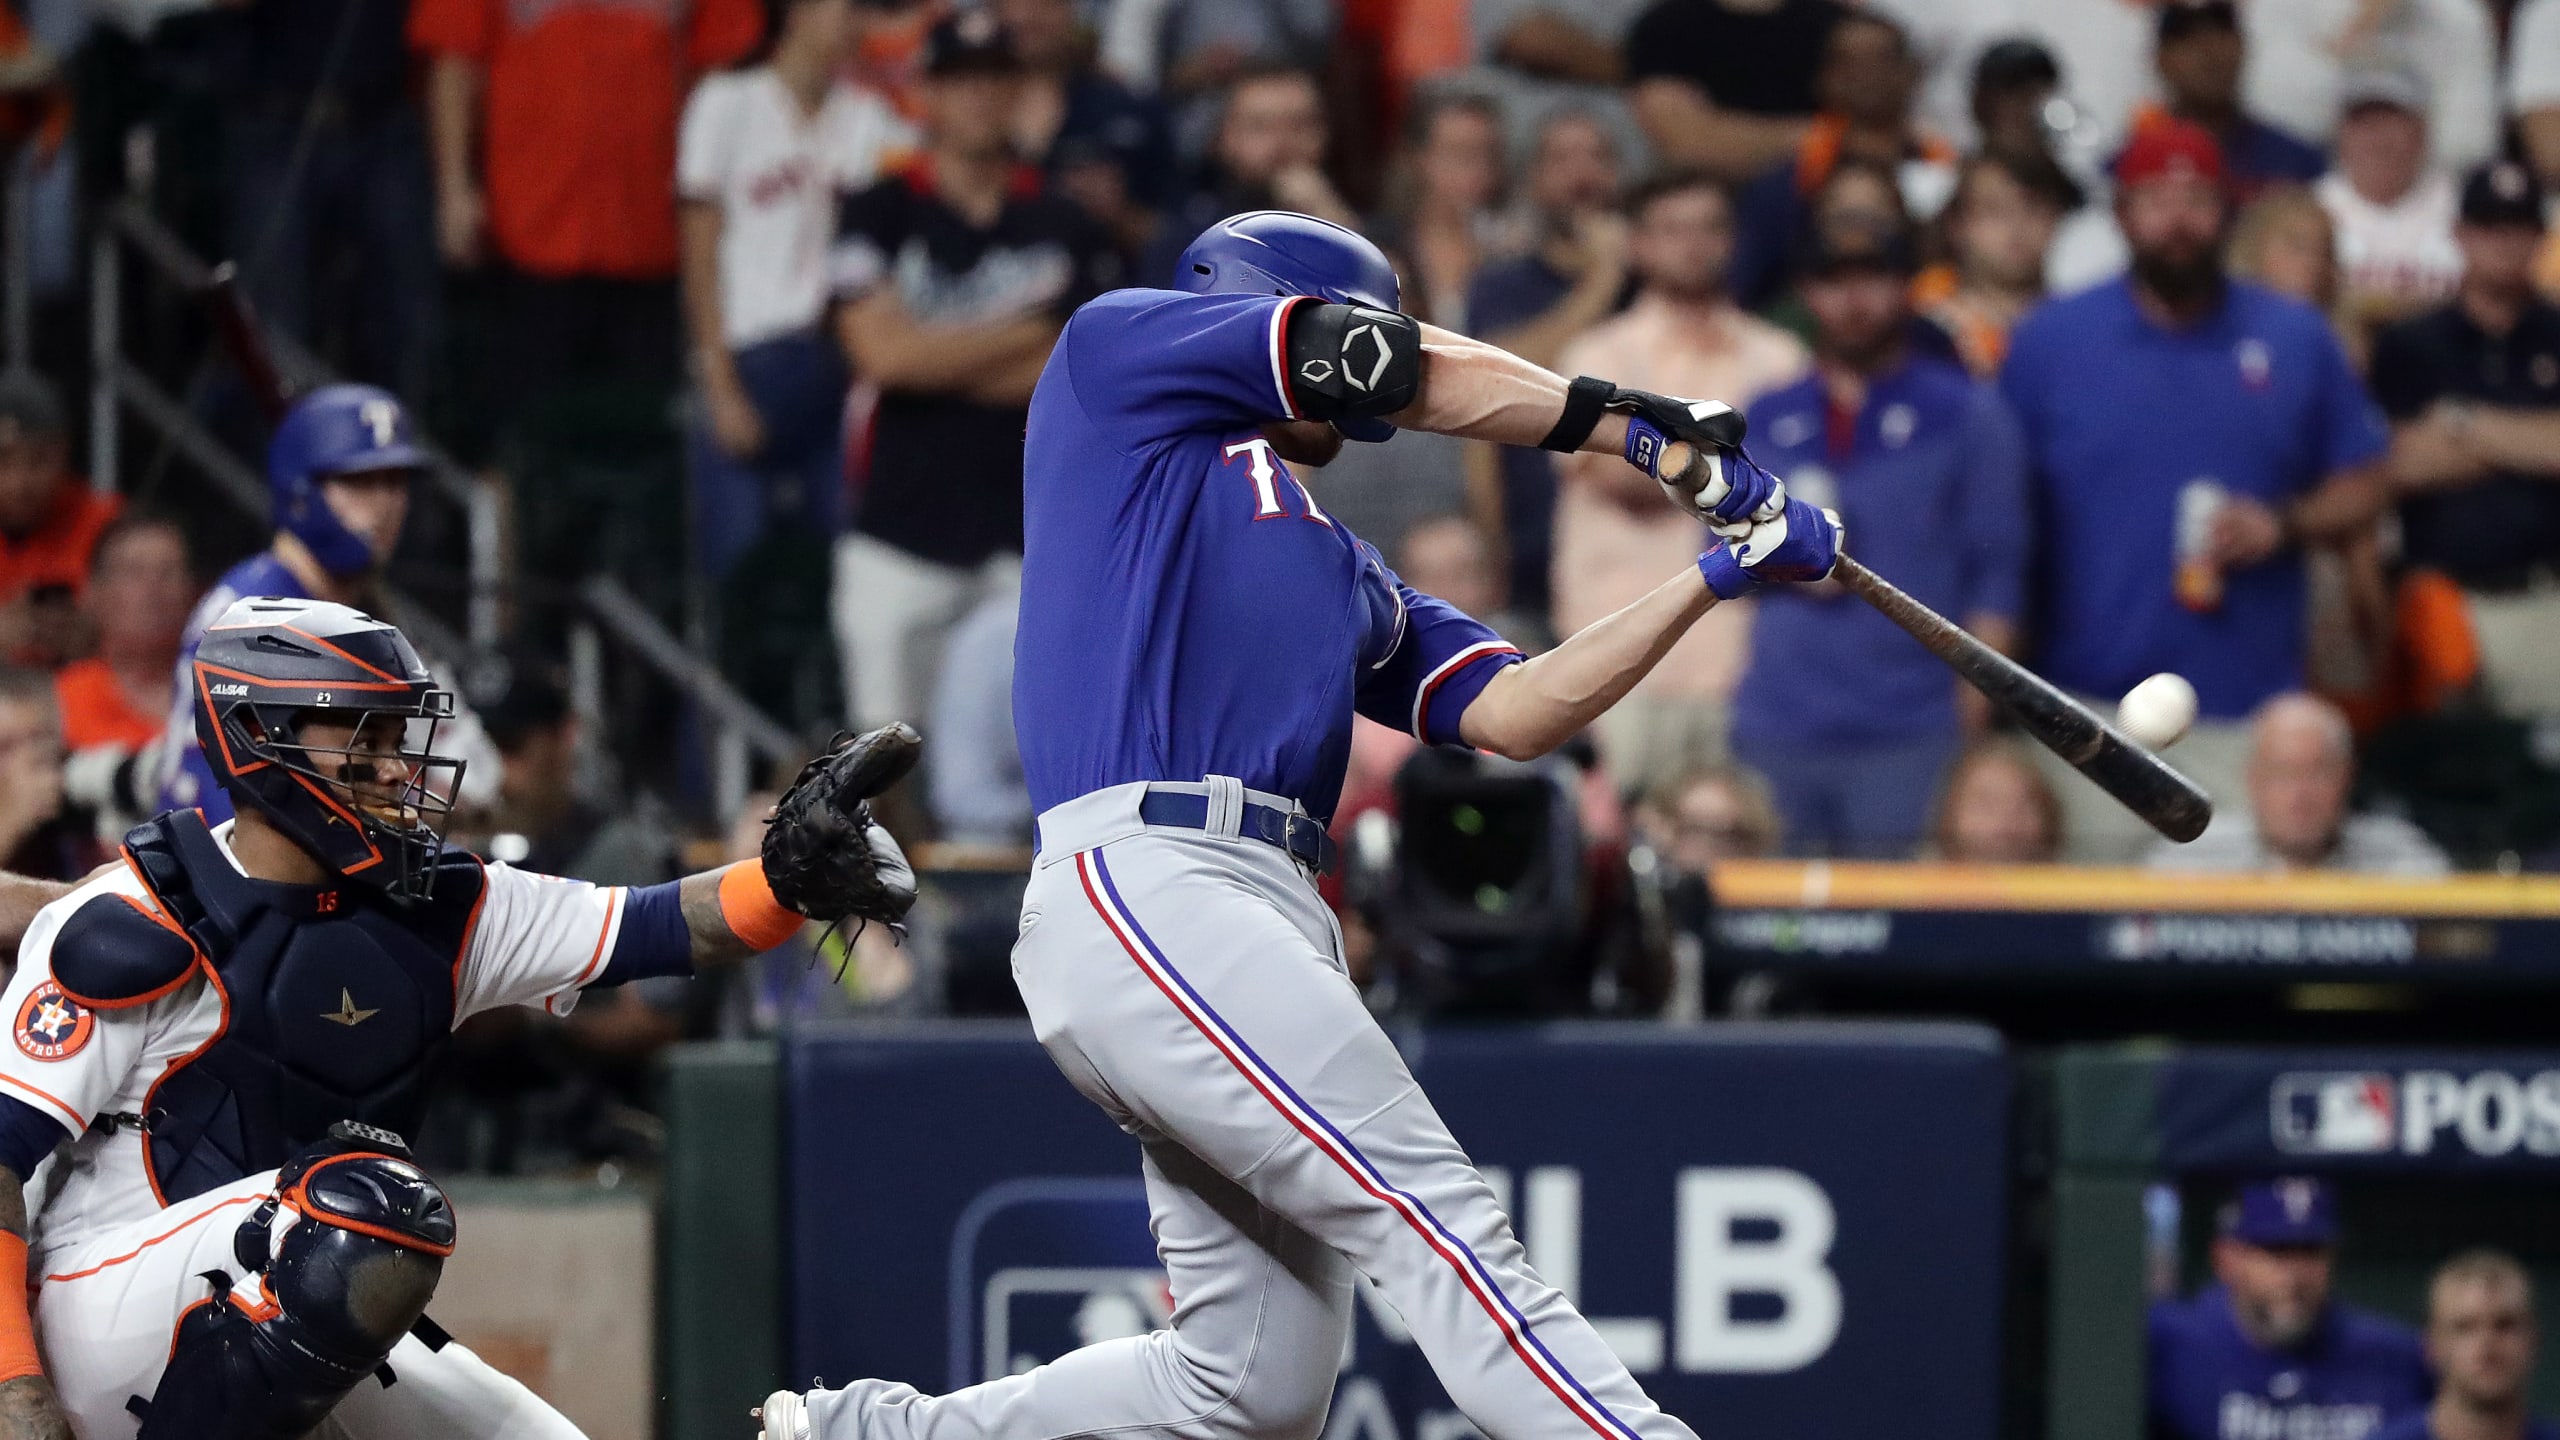 Rangers' Bruce Bochy likes chances after ALCS-tying, Game 4 blowout loss to  Astros 